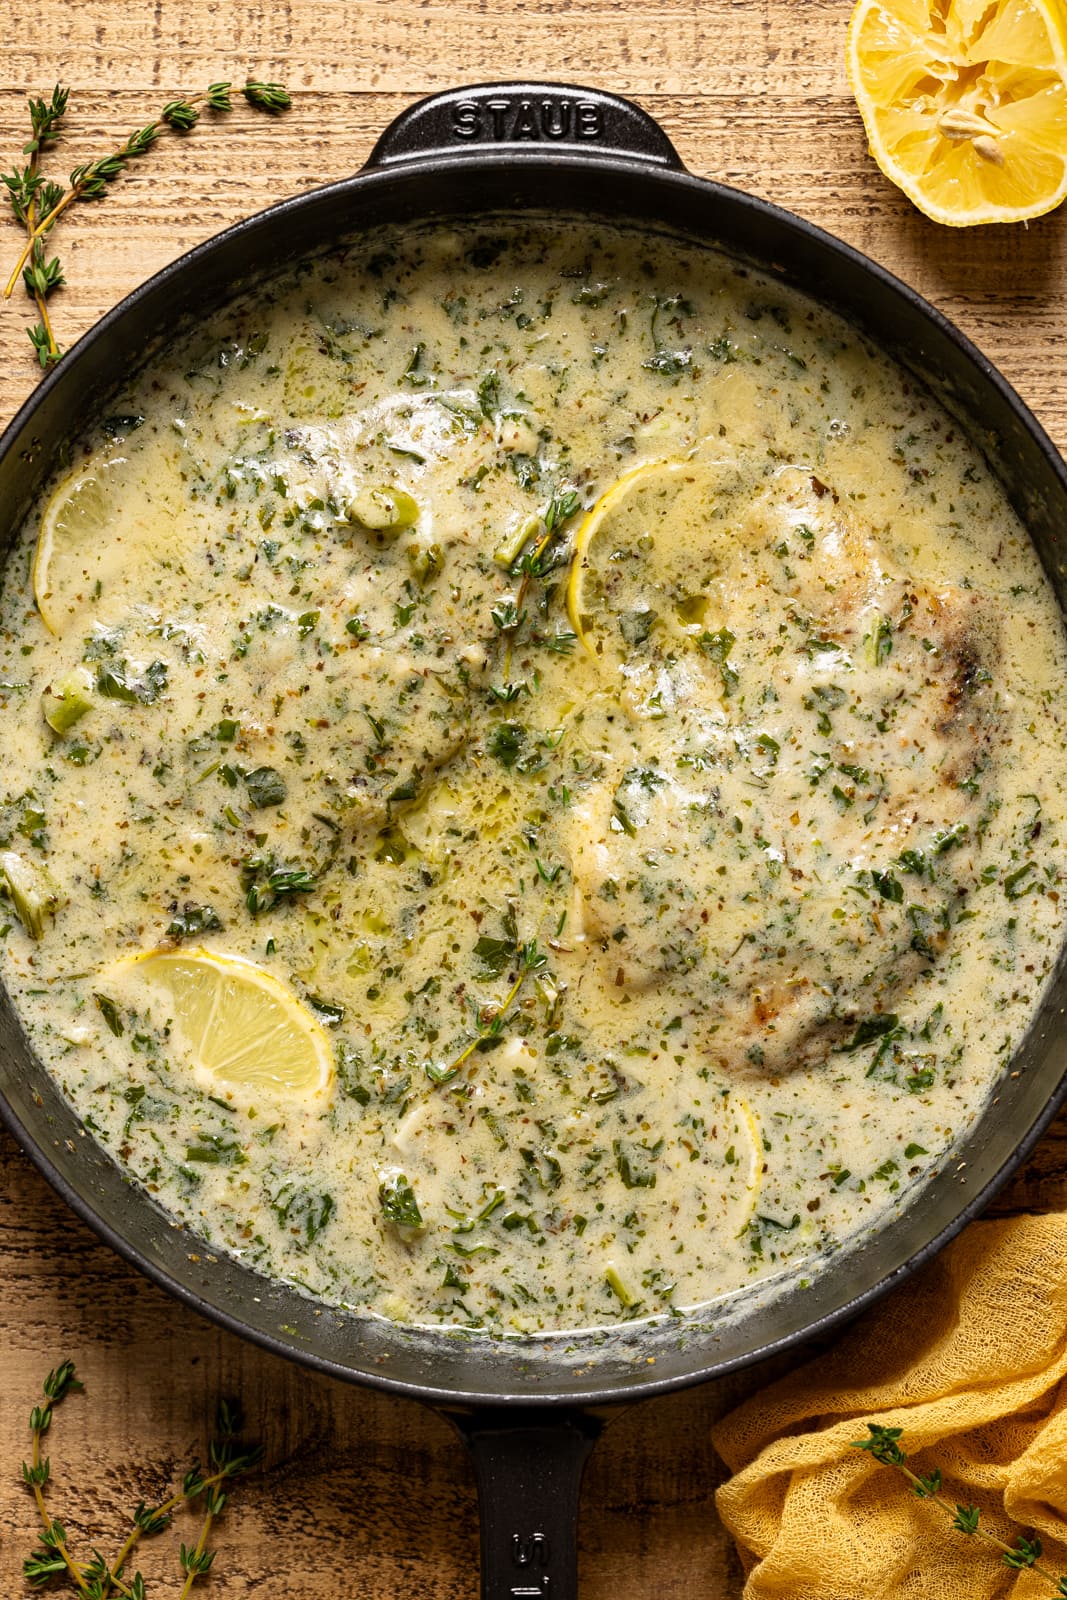 Creamy tilapia in black skillet with thyme sprigs and lemon.